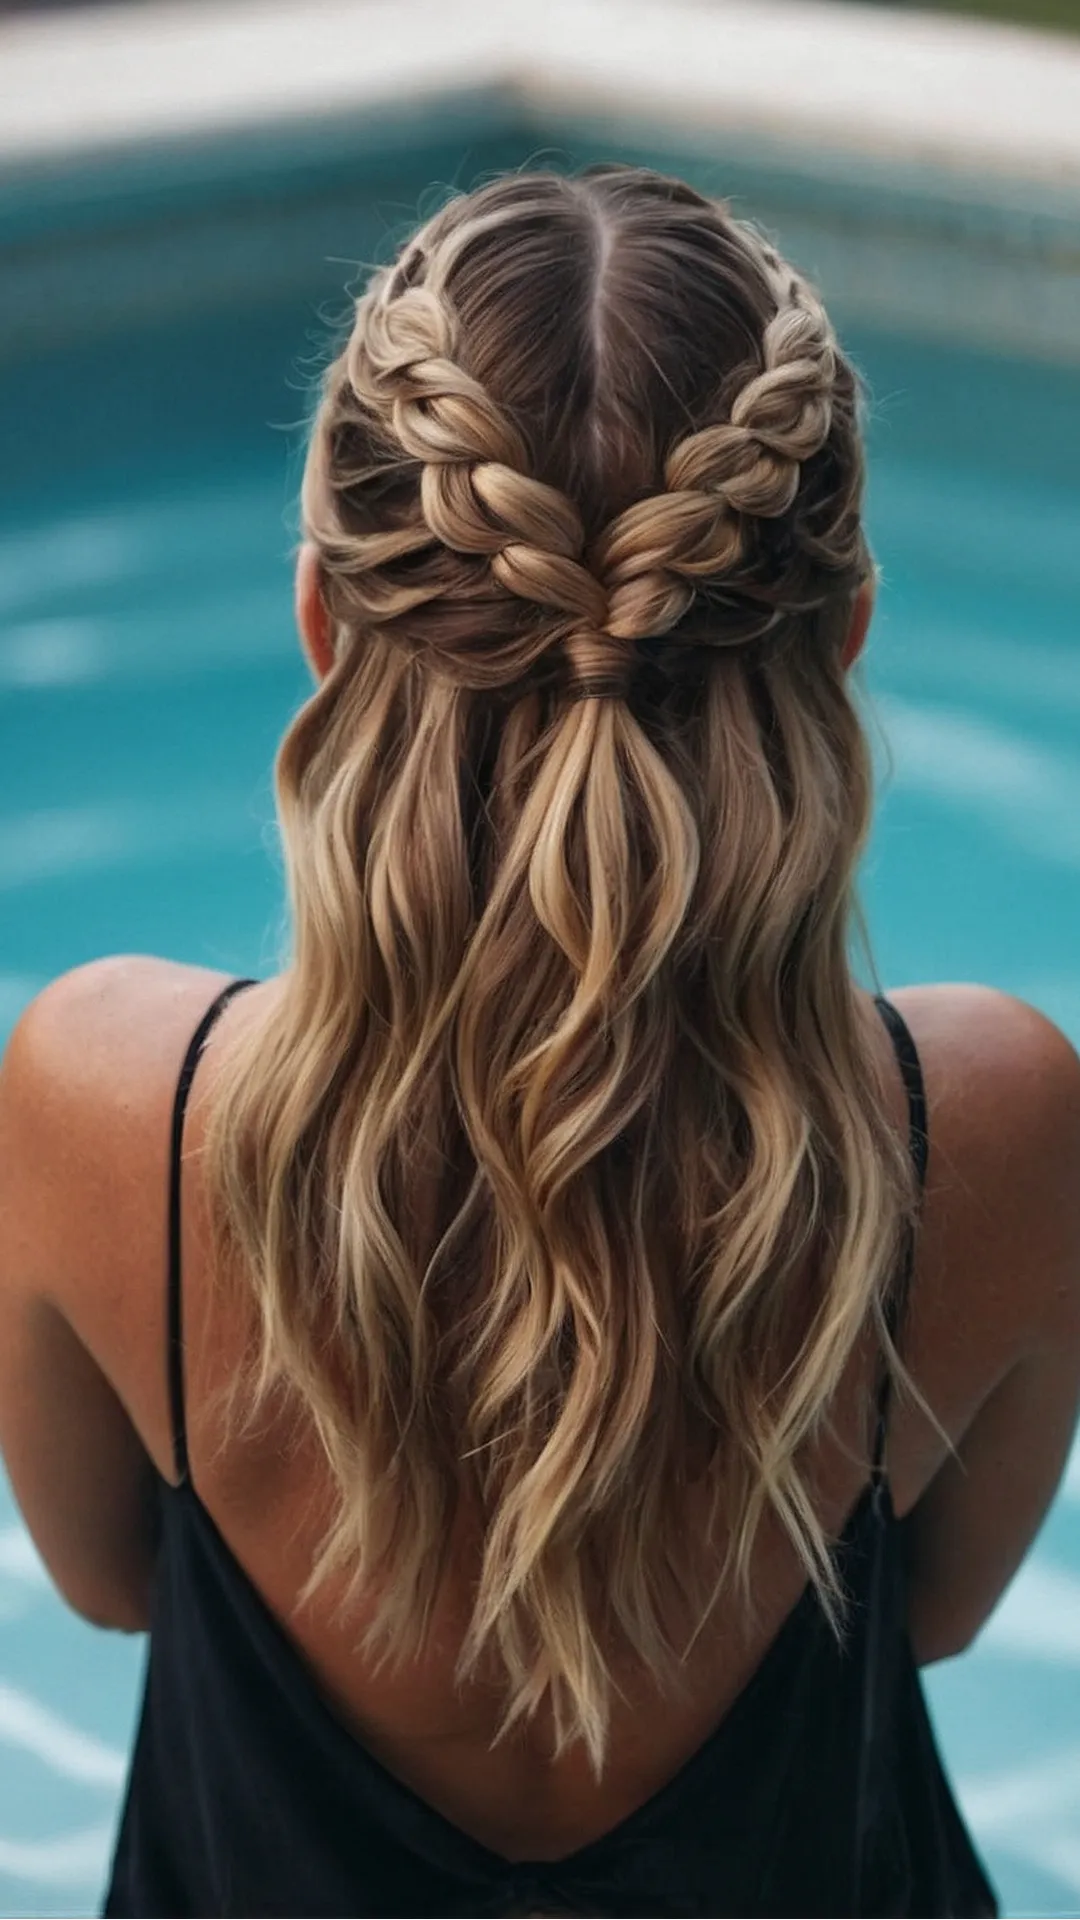 Dive in with Style: Pool Hairdos to Rock